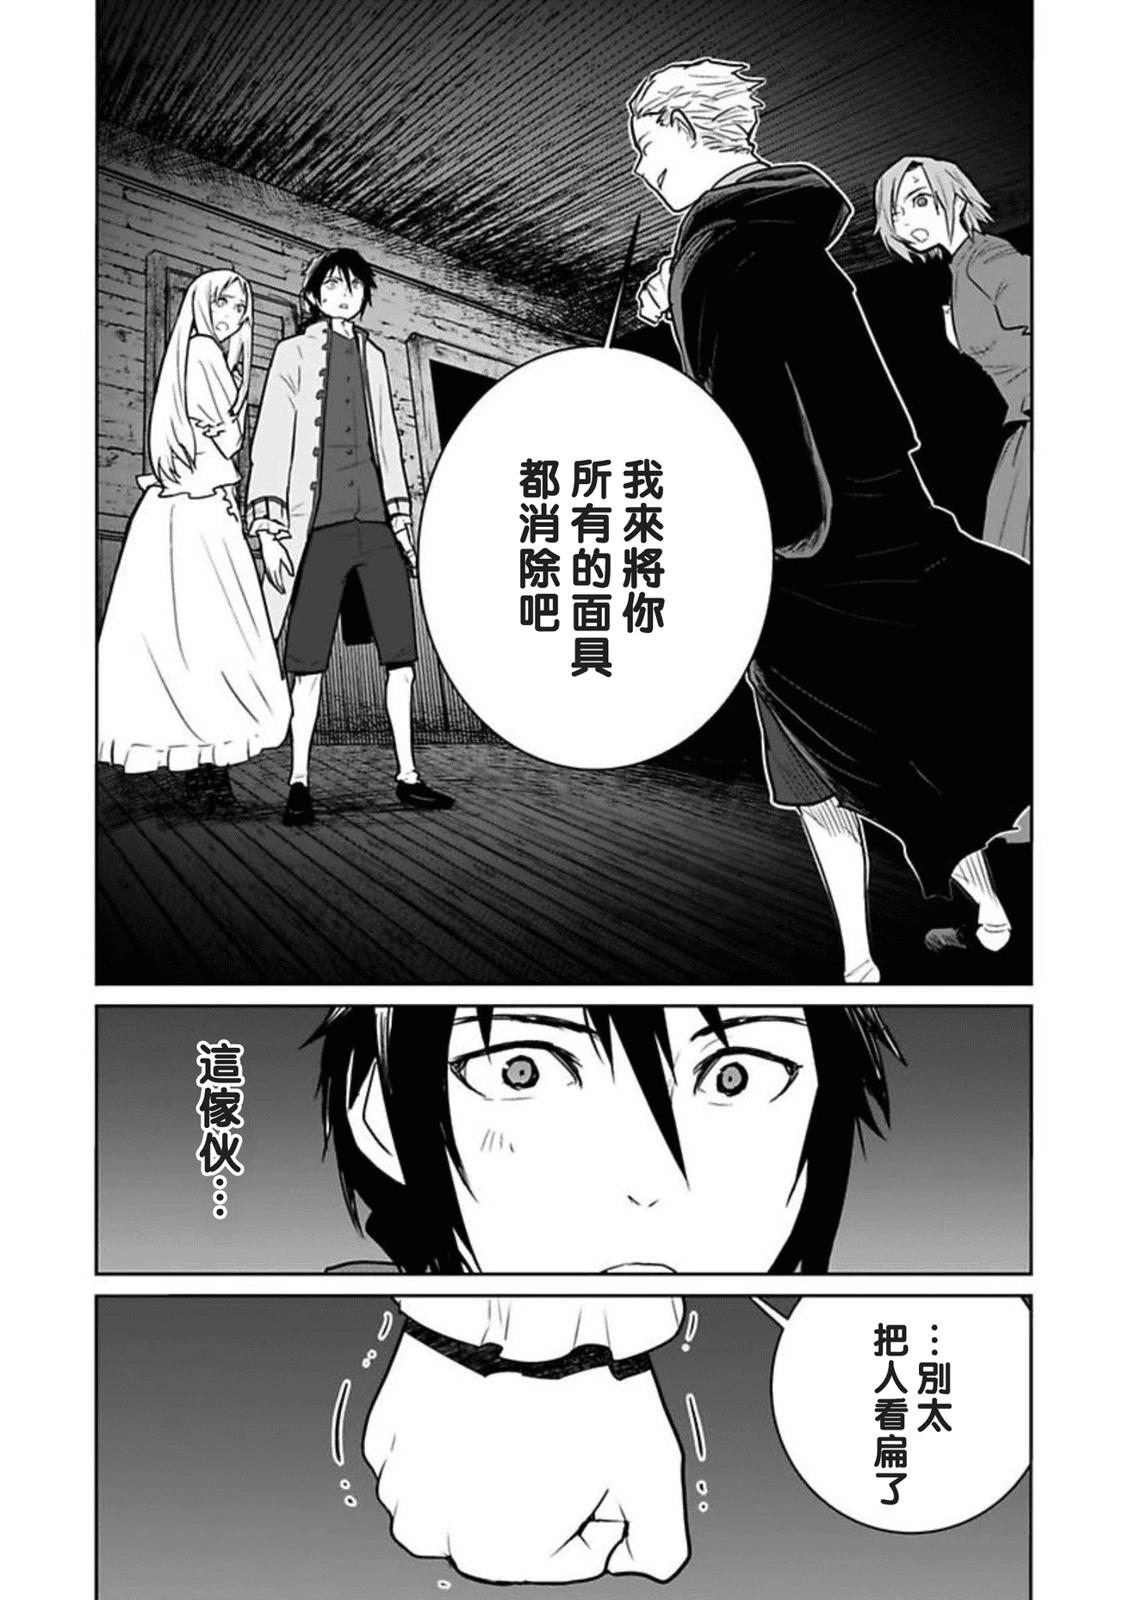 BACCANO! 永生之酒！~from the 1700s~ - 第07話 - 4